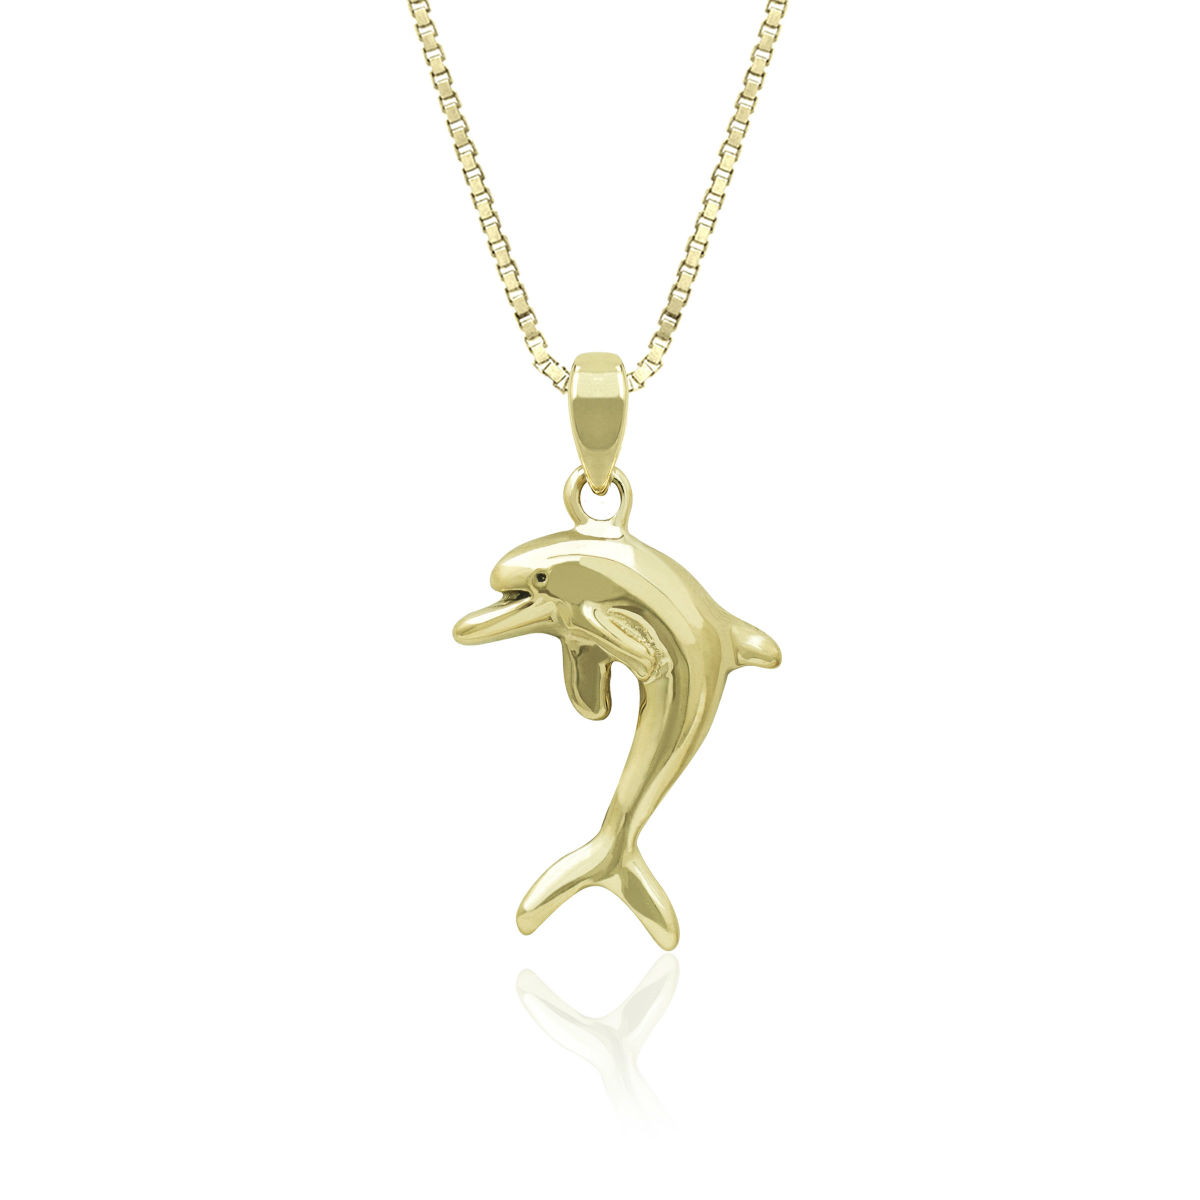 Details about   14K Yellow Gold Dolphin Charm Pendant MSRP $57 